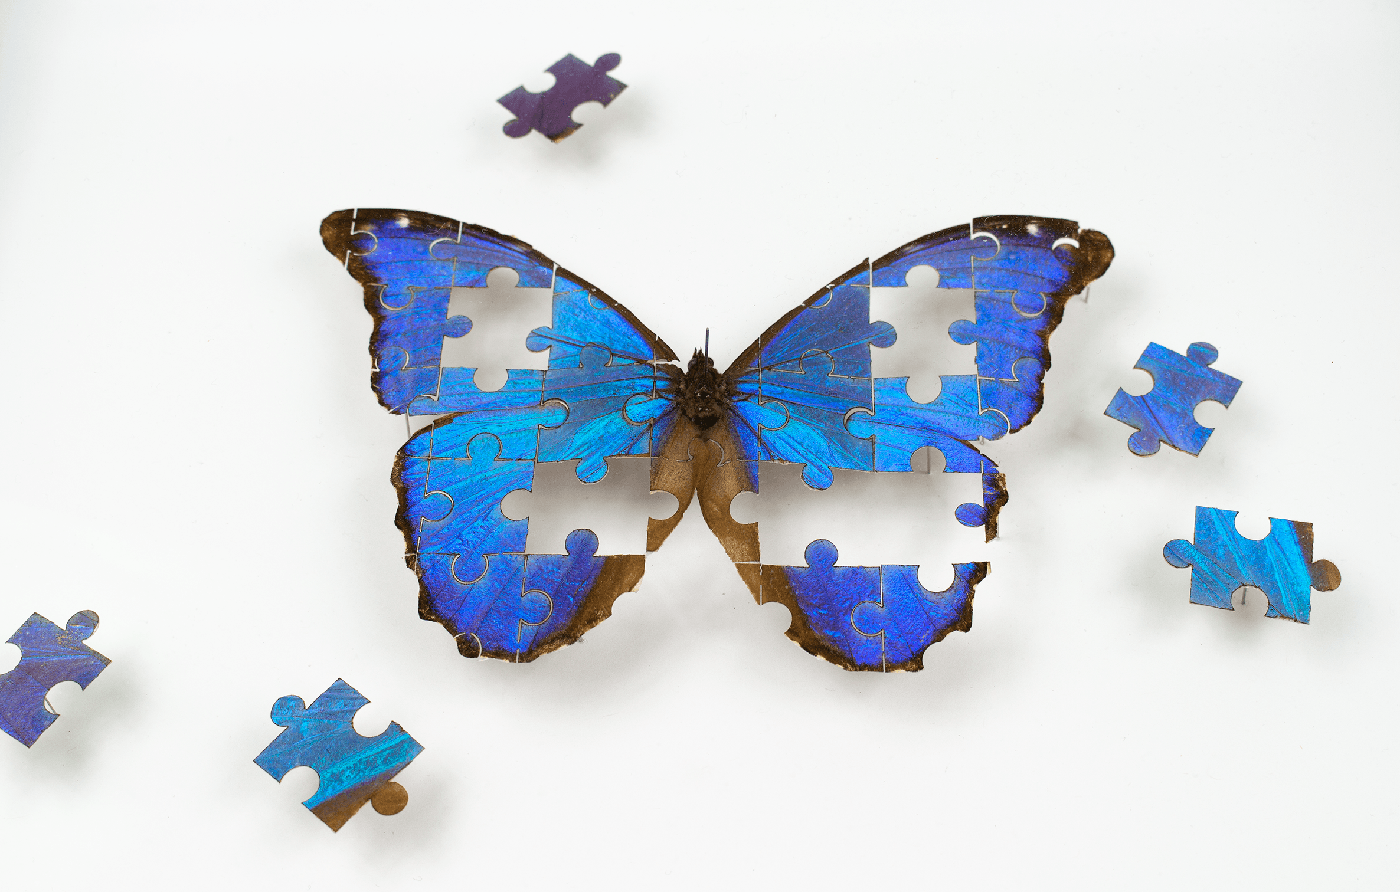 The Puzzle is a framed artwork by Fiona Parkinson, a taxidermy Blue Morpho cut into jigsaw puzzle